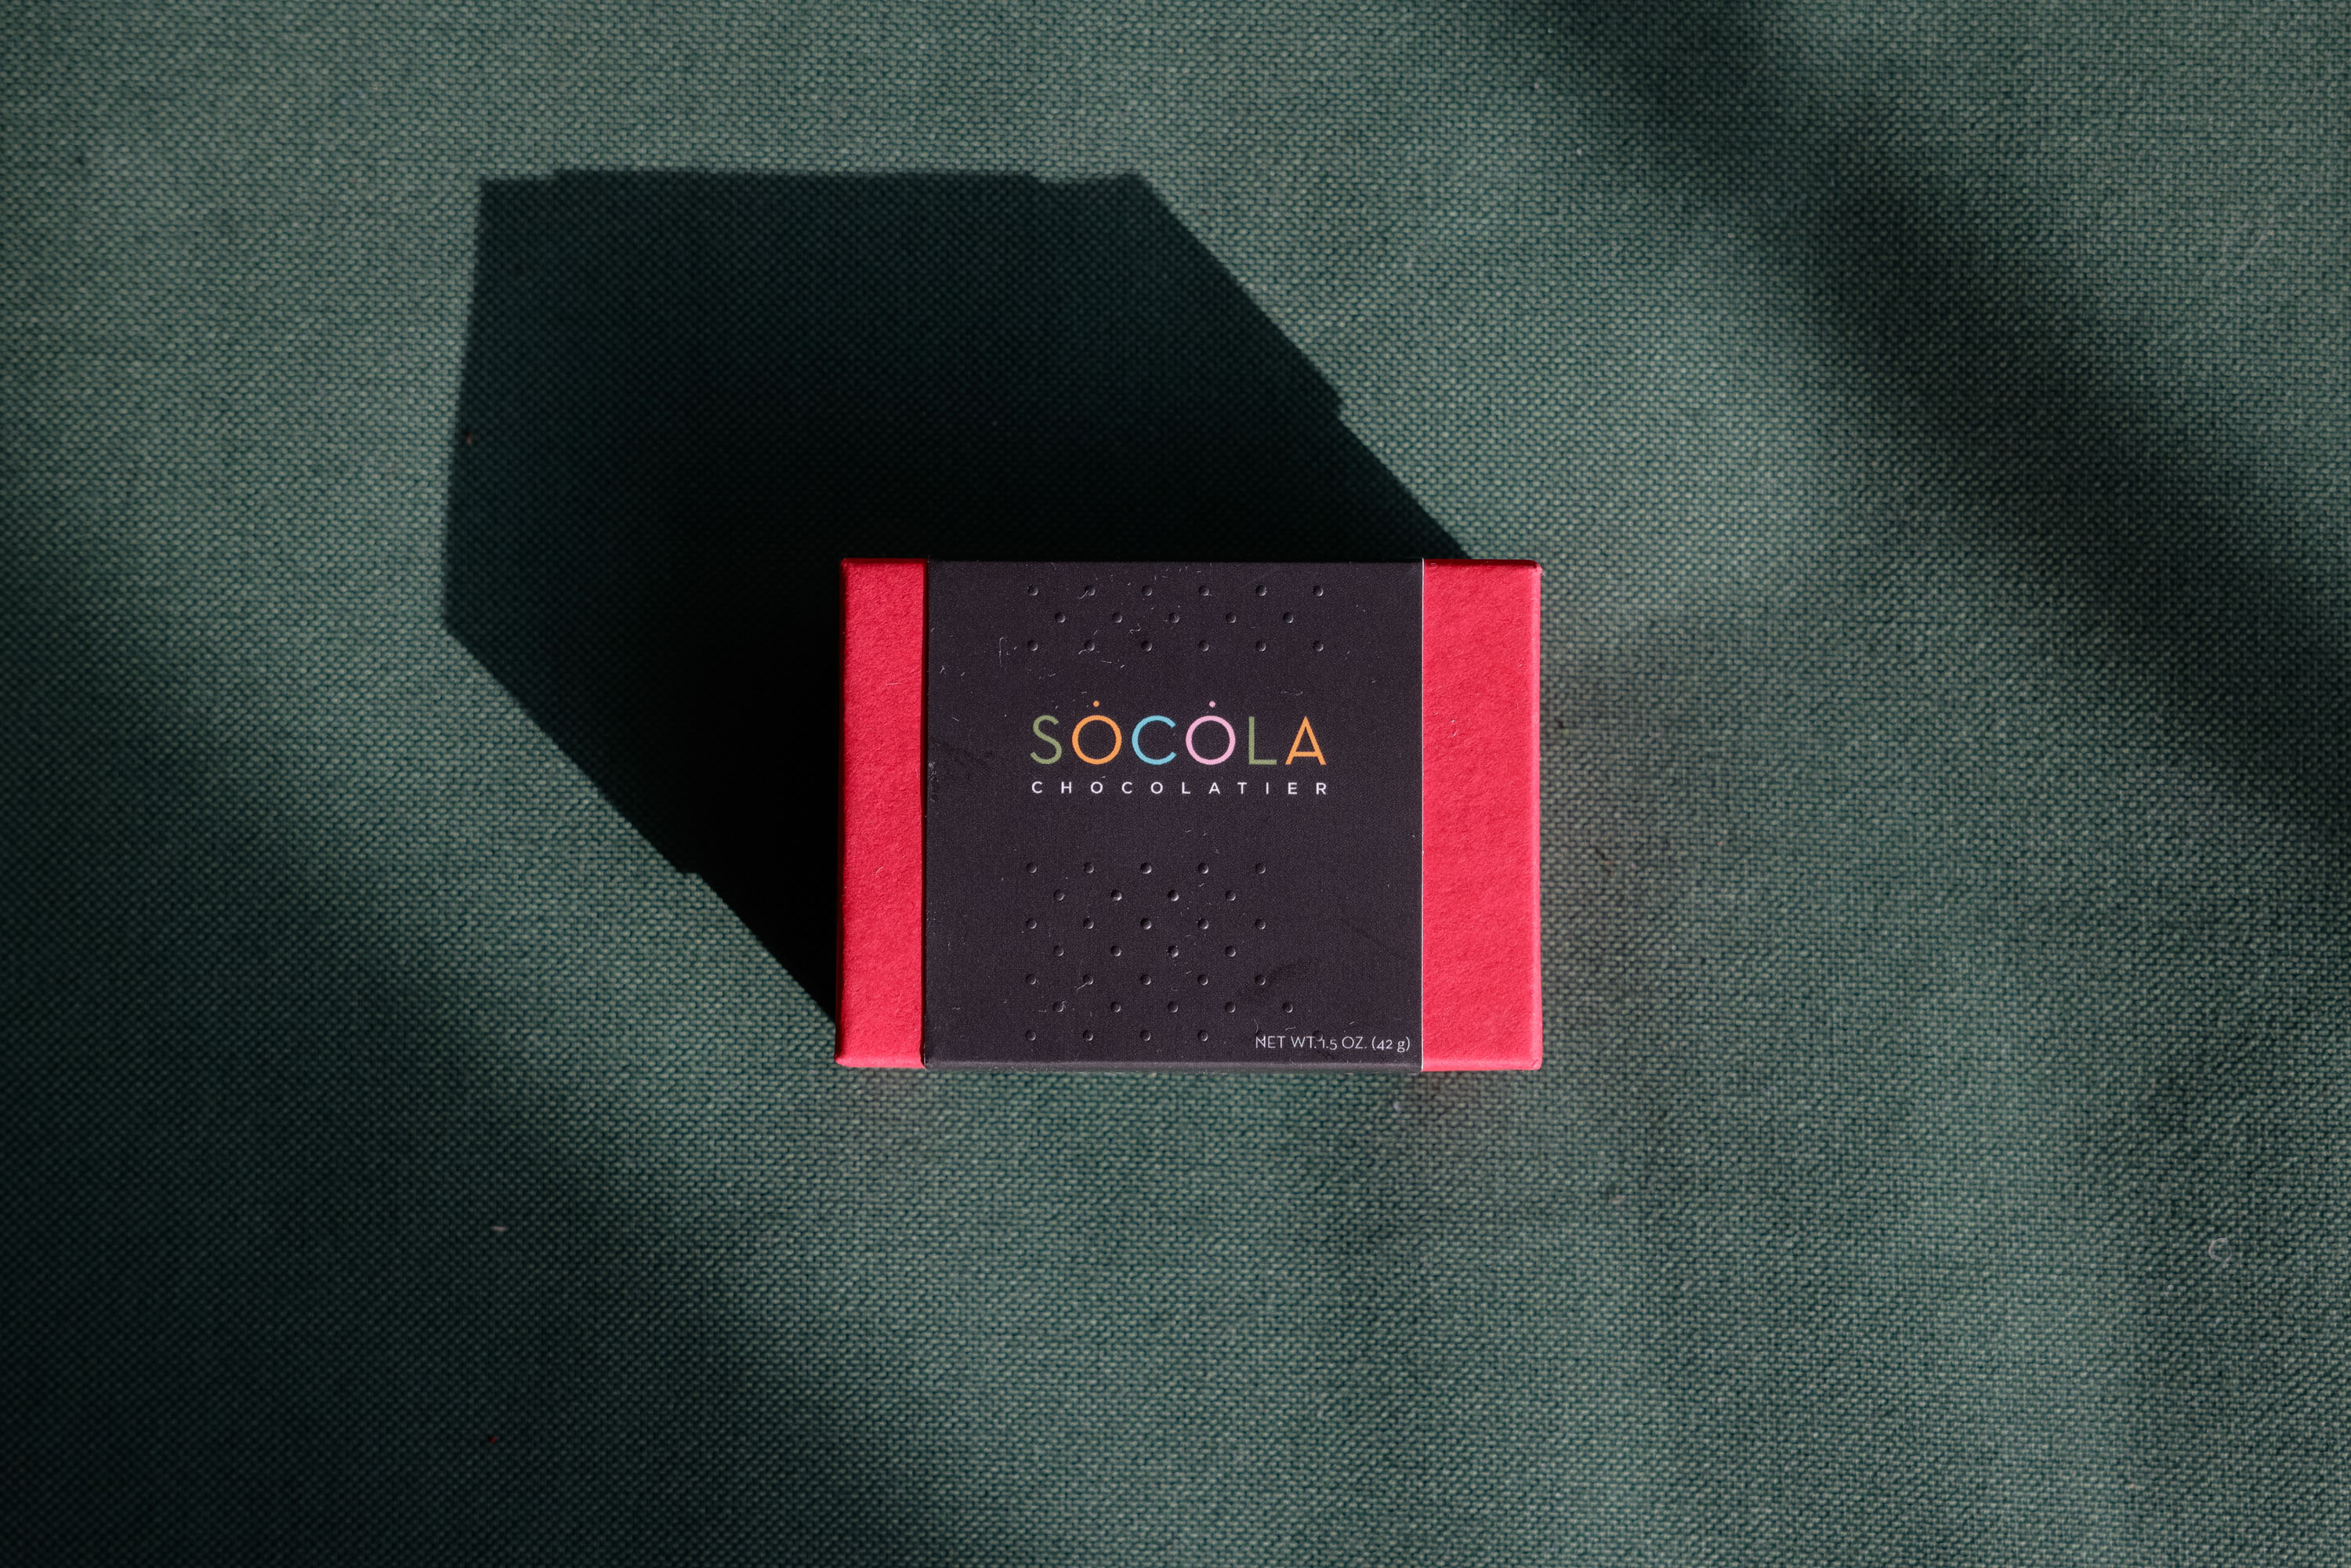 A top-down product shot Socola Chocolatier in a red box.